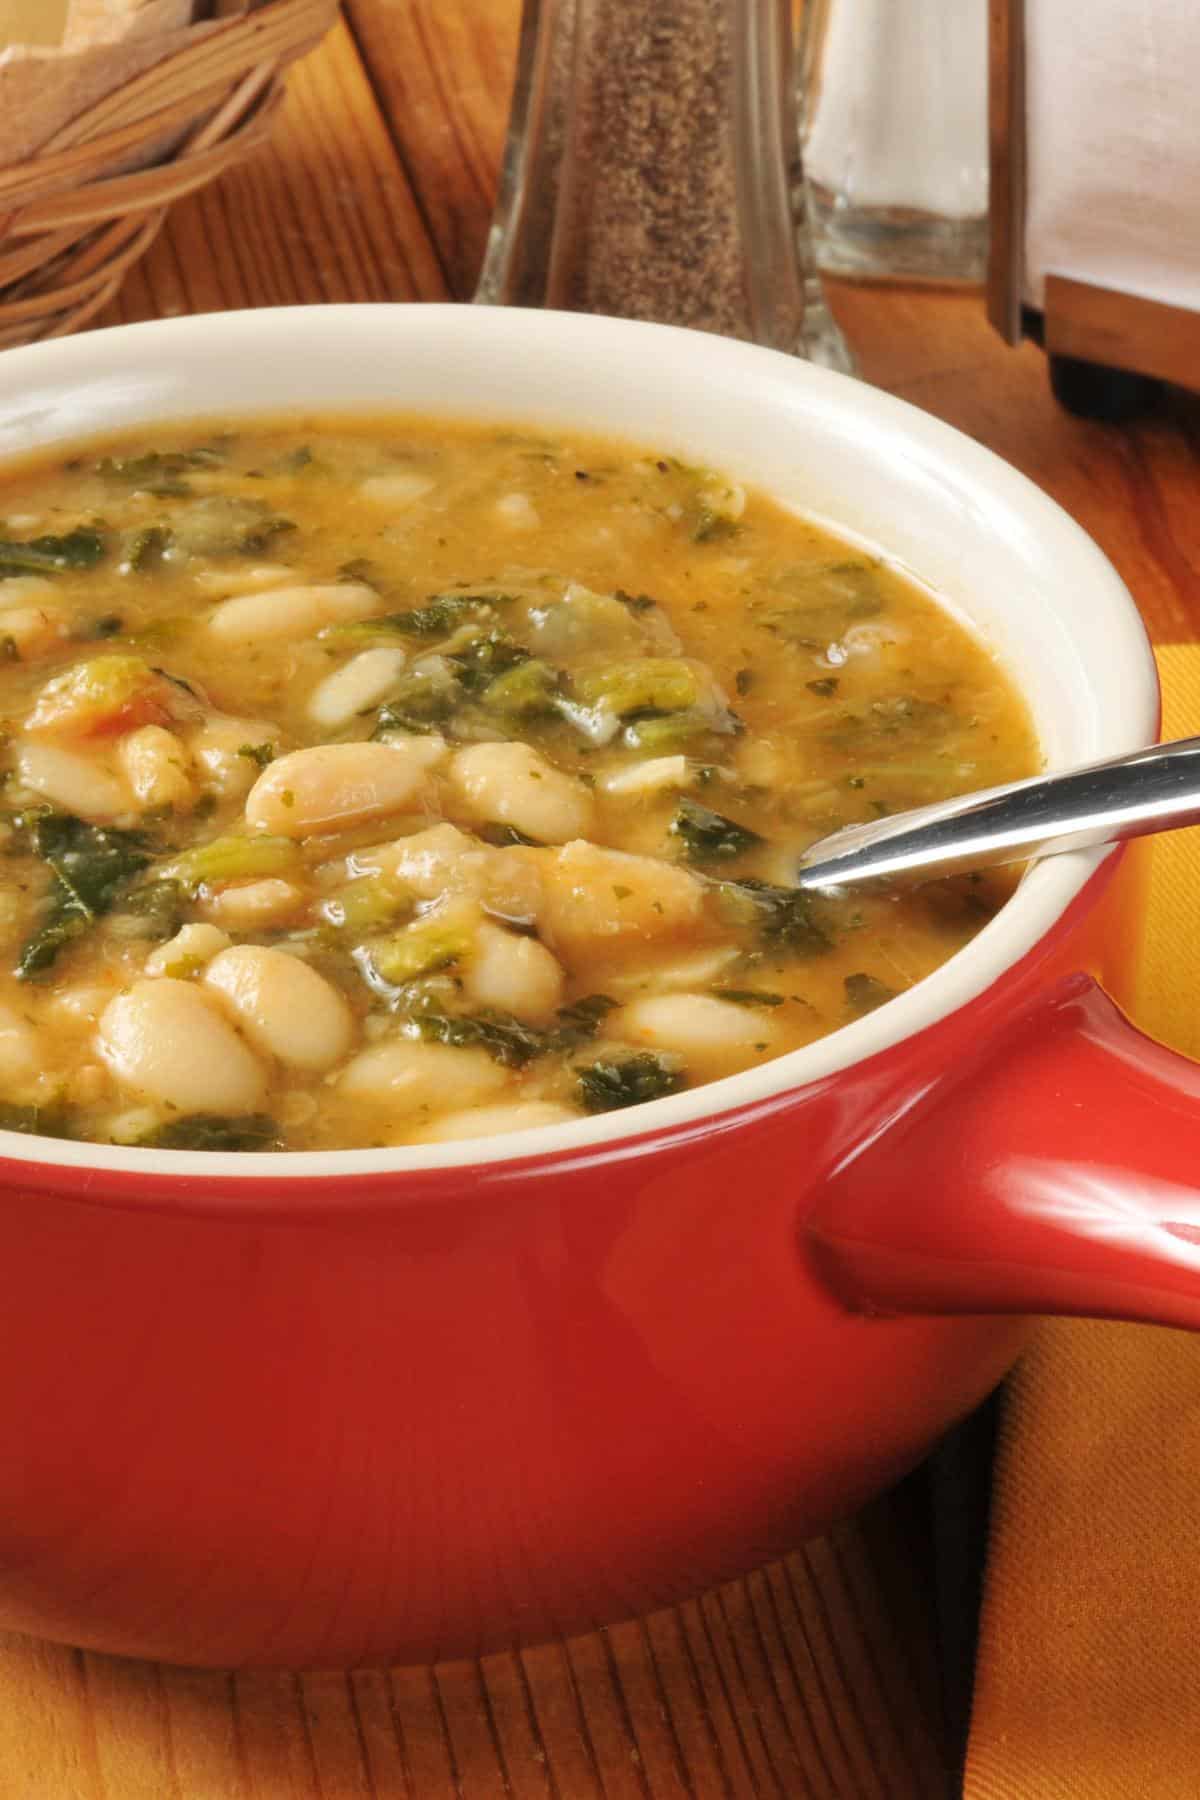 Large red mug of white bean soup with a spoon.